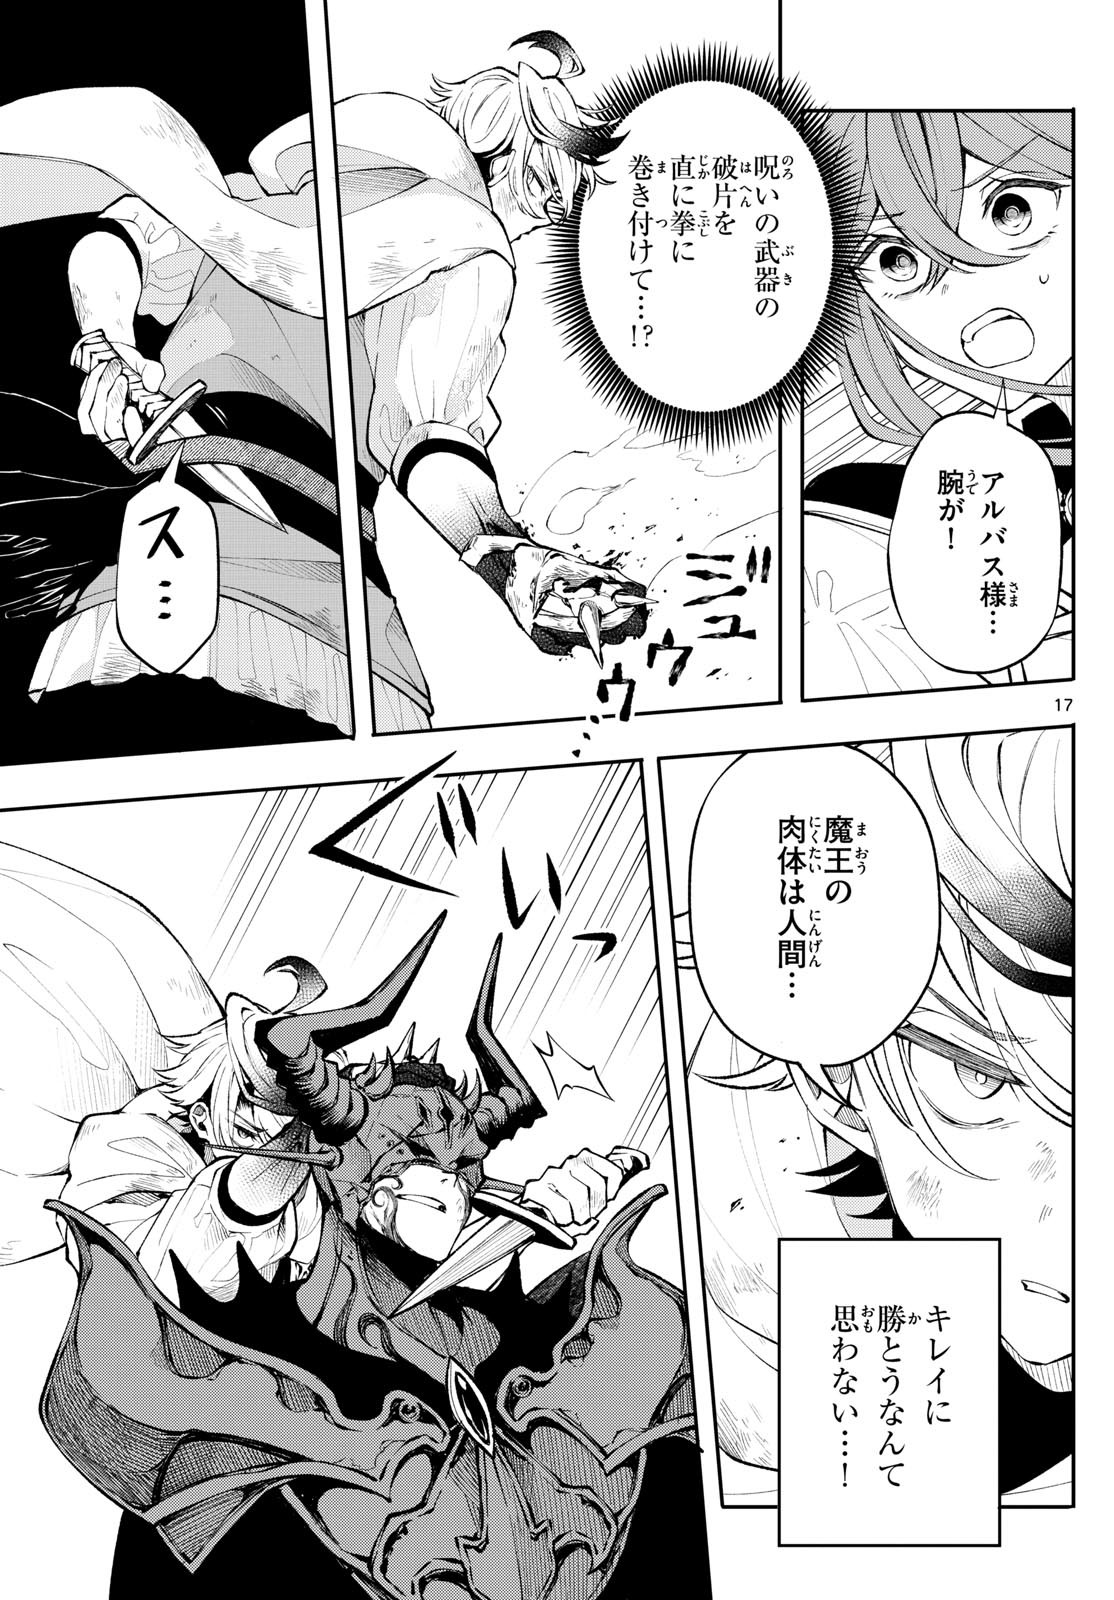 Albus Changes the World 廻天のアルバス 第7話 - Page 17